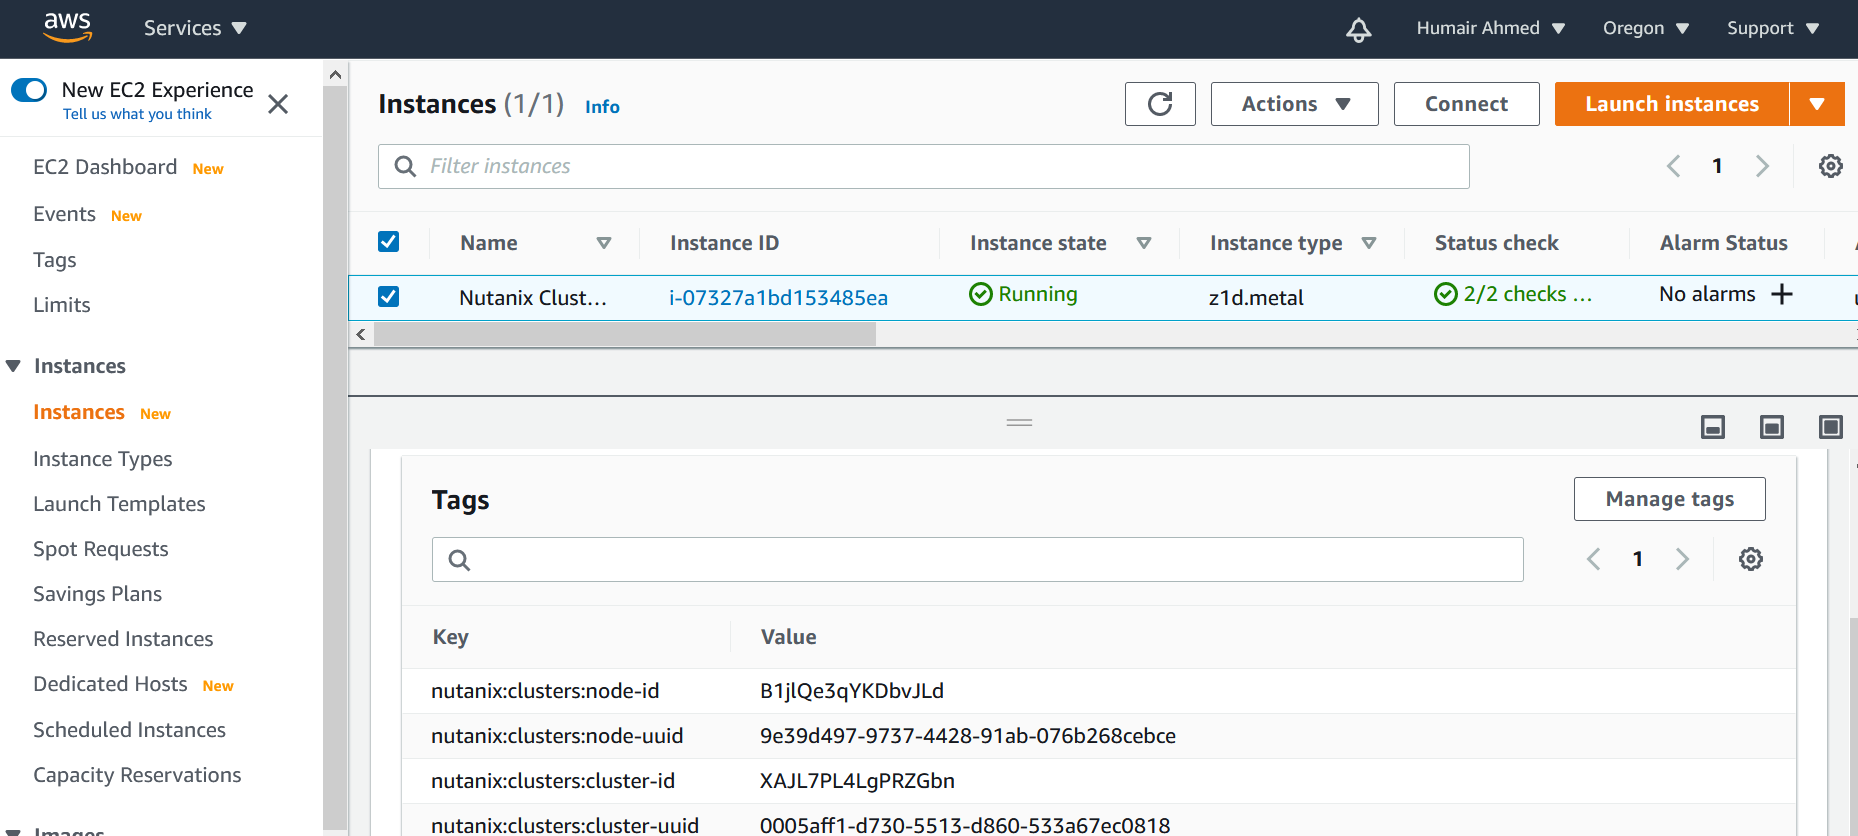 AWS Console - UUID of the Nutanix Cluster